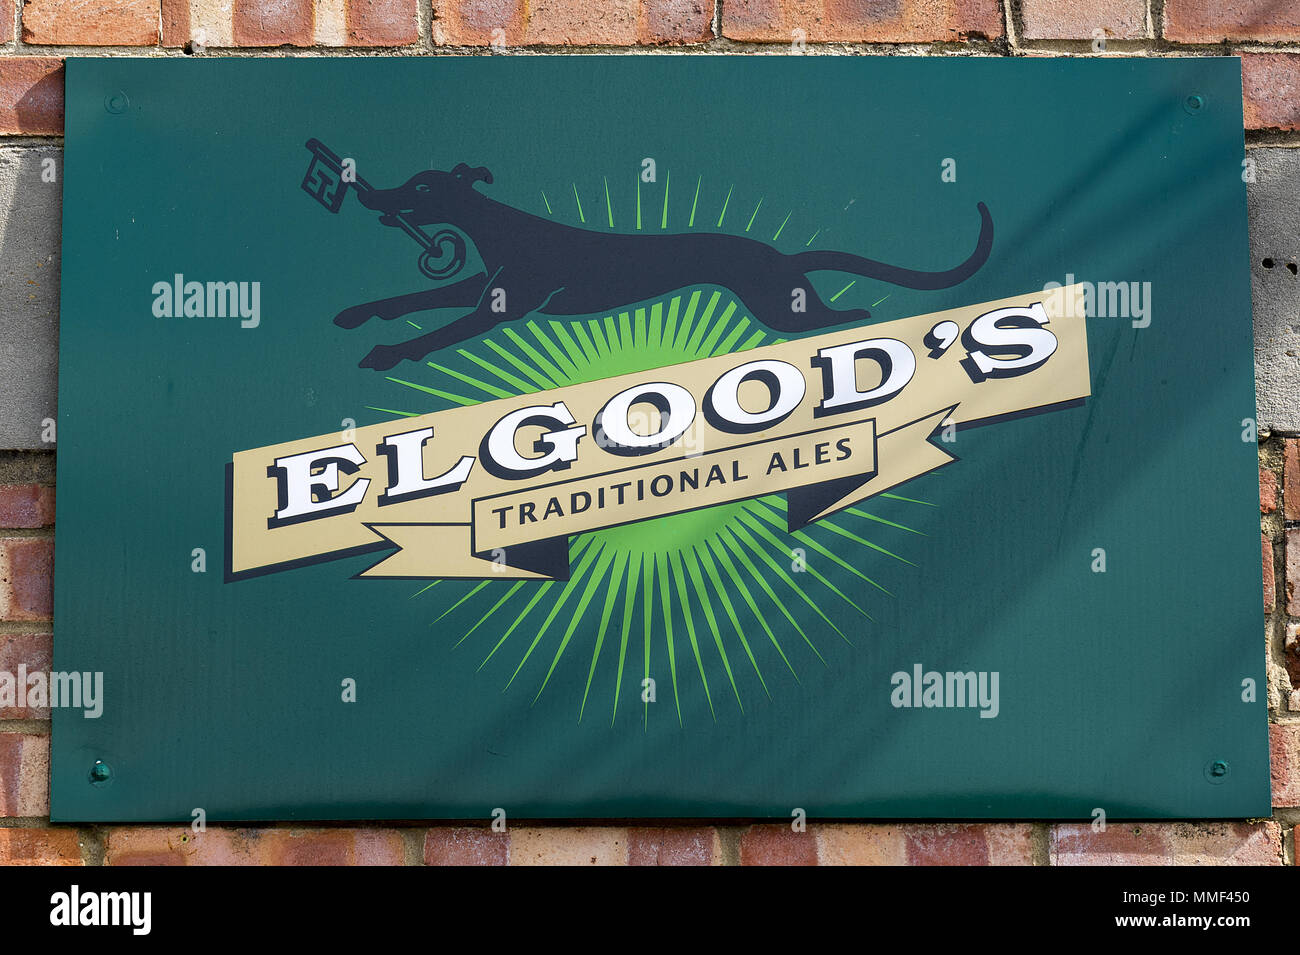 Elgood's Brewery enamel sign showing the Black Dog brand  illustration. Wisbech, Cambridgeshire, England. Makers of traditional ales. Stock Photo